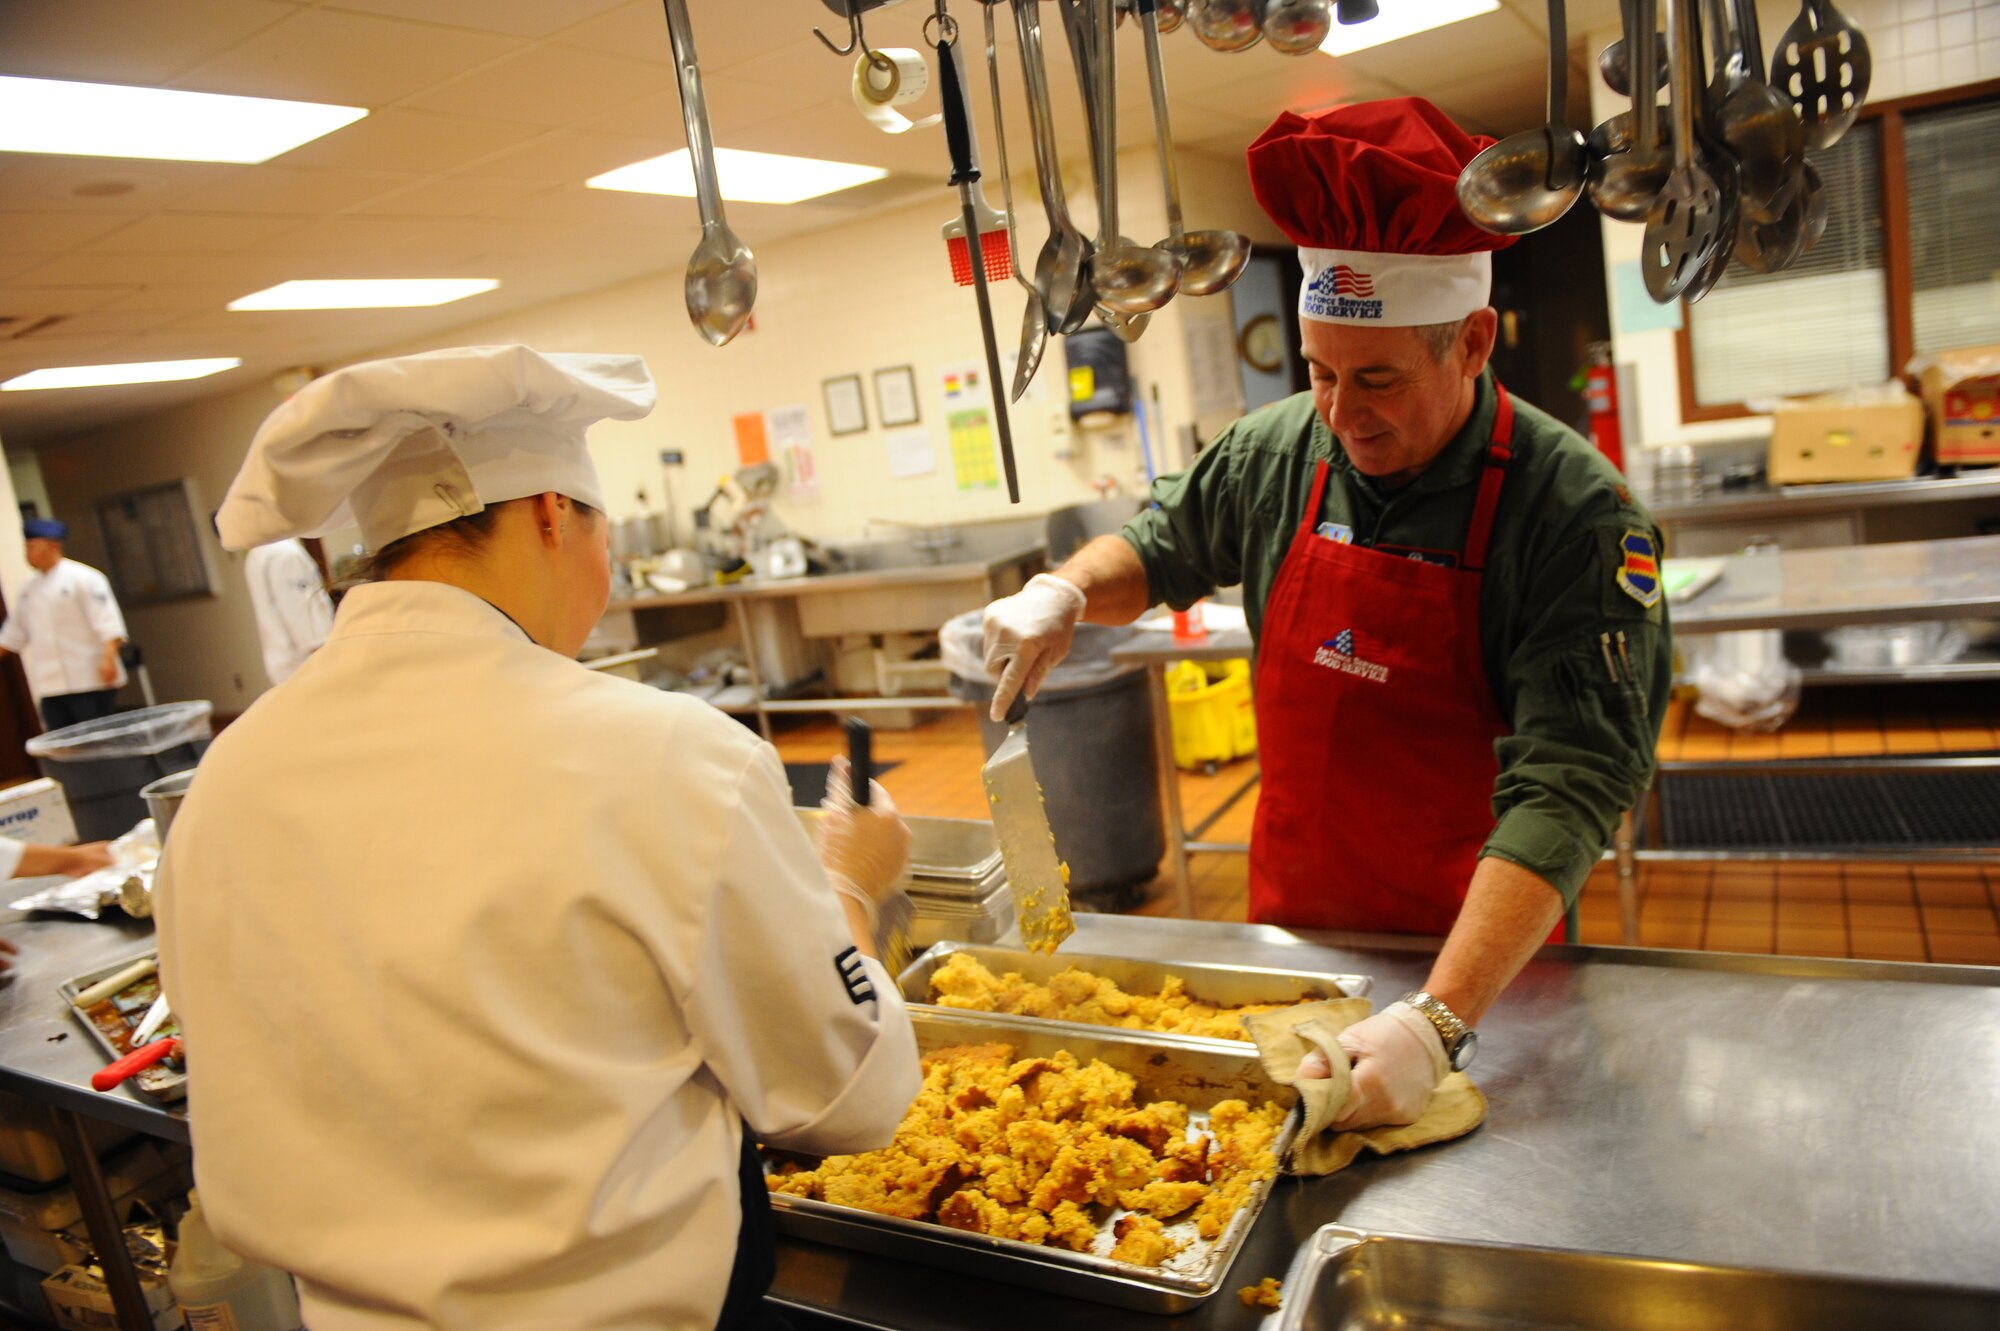 OFFUTT AIR FORCE BASE, Neb. - Maj. Doug Beidler, from the 38th Reconnaissance Squadron, dons his chef hat as he gets to work preparing stuffing with help from Senior Airman Lana Fowler at the Ronald L. King Dining facility for an annual Thanksgiving dinner Nov. 25.  Airmen, retirees and their families got a chance to have their Thanksgiving dinner professionally prepared by the Air Combat Command John L. Hennessy award winning Airmen while wing leadership served the food. U.S. Air Force photo by Josh Plueger (Released)
